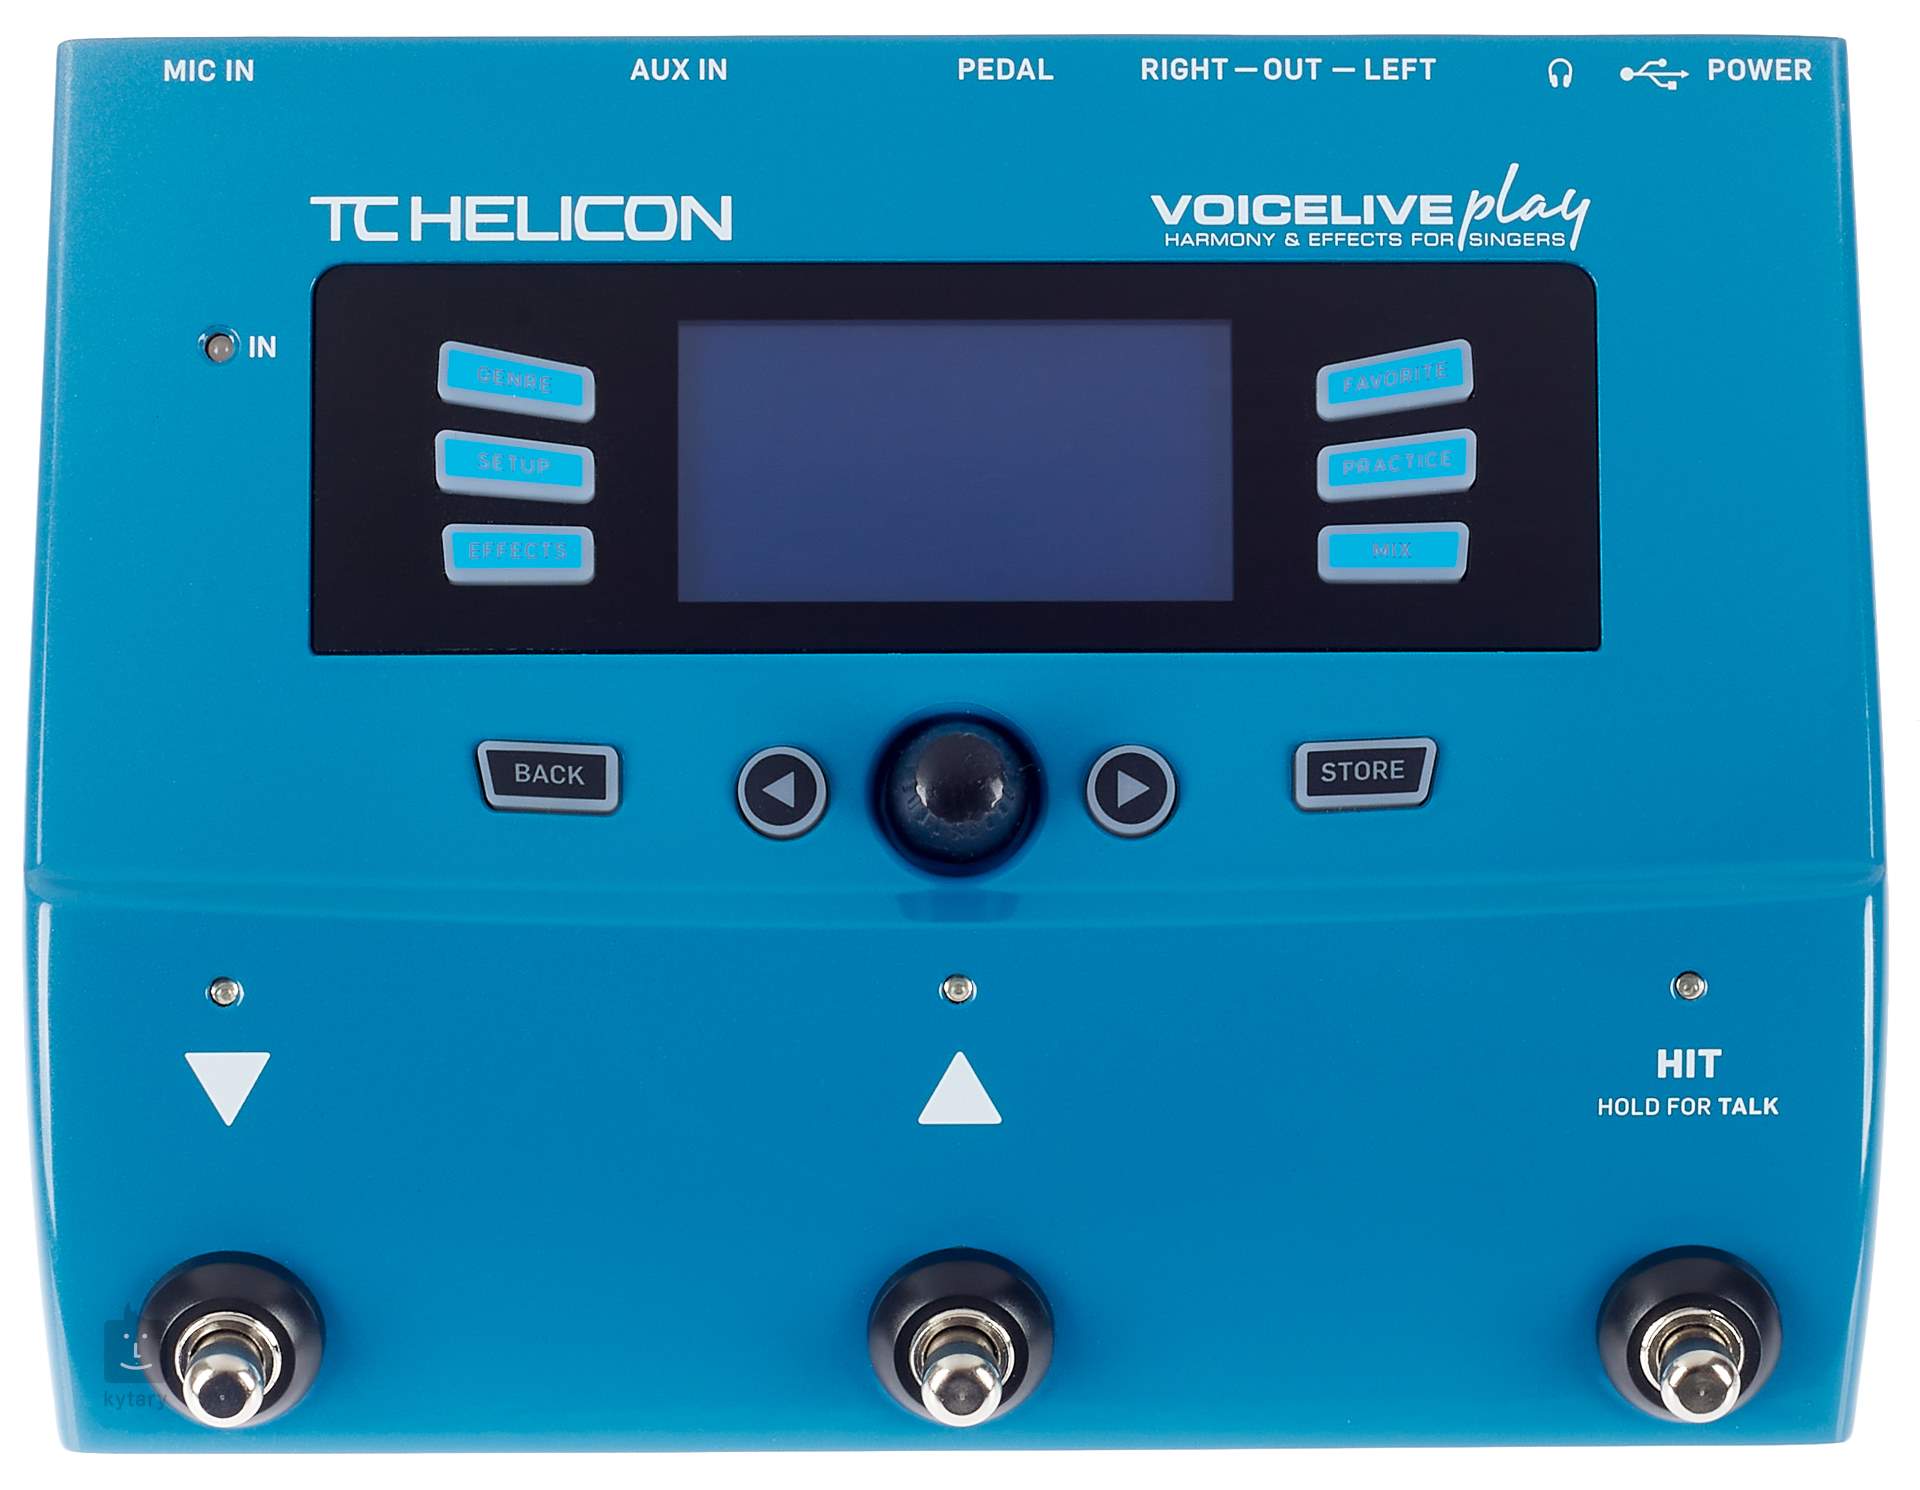 voicelive play TC HELICON - エフェクター